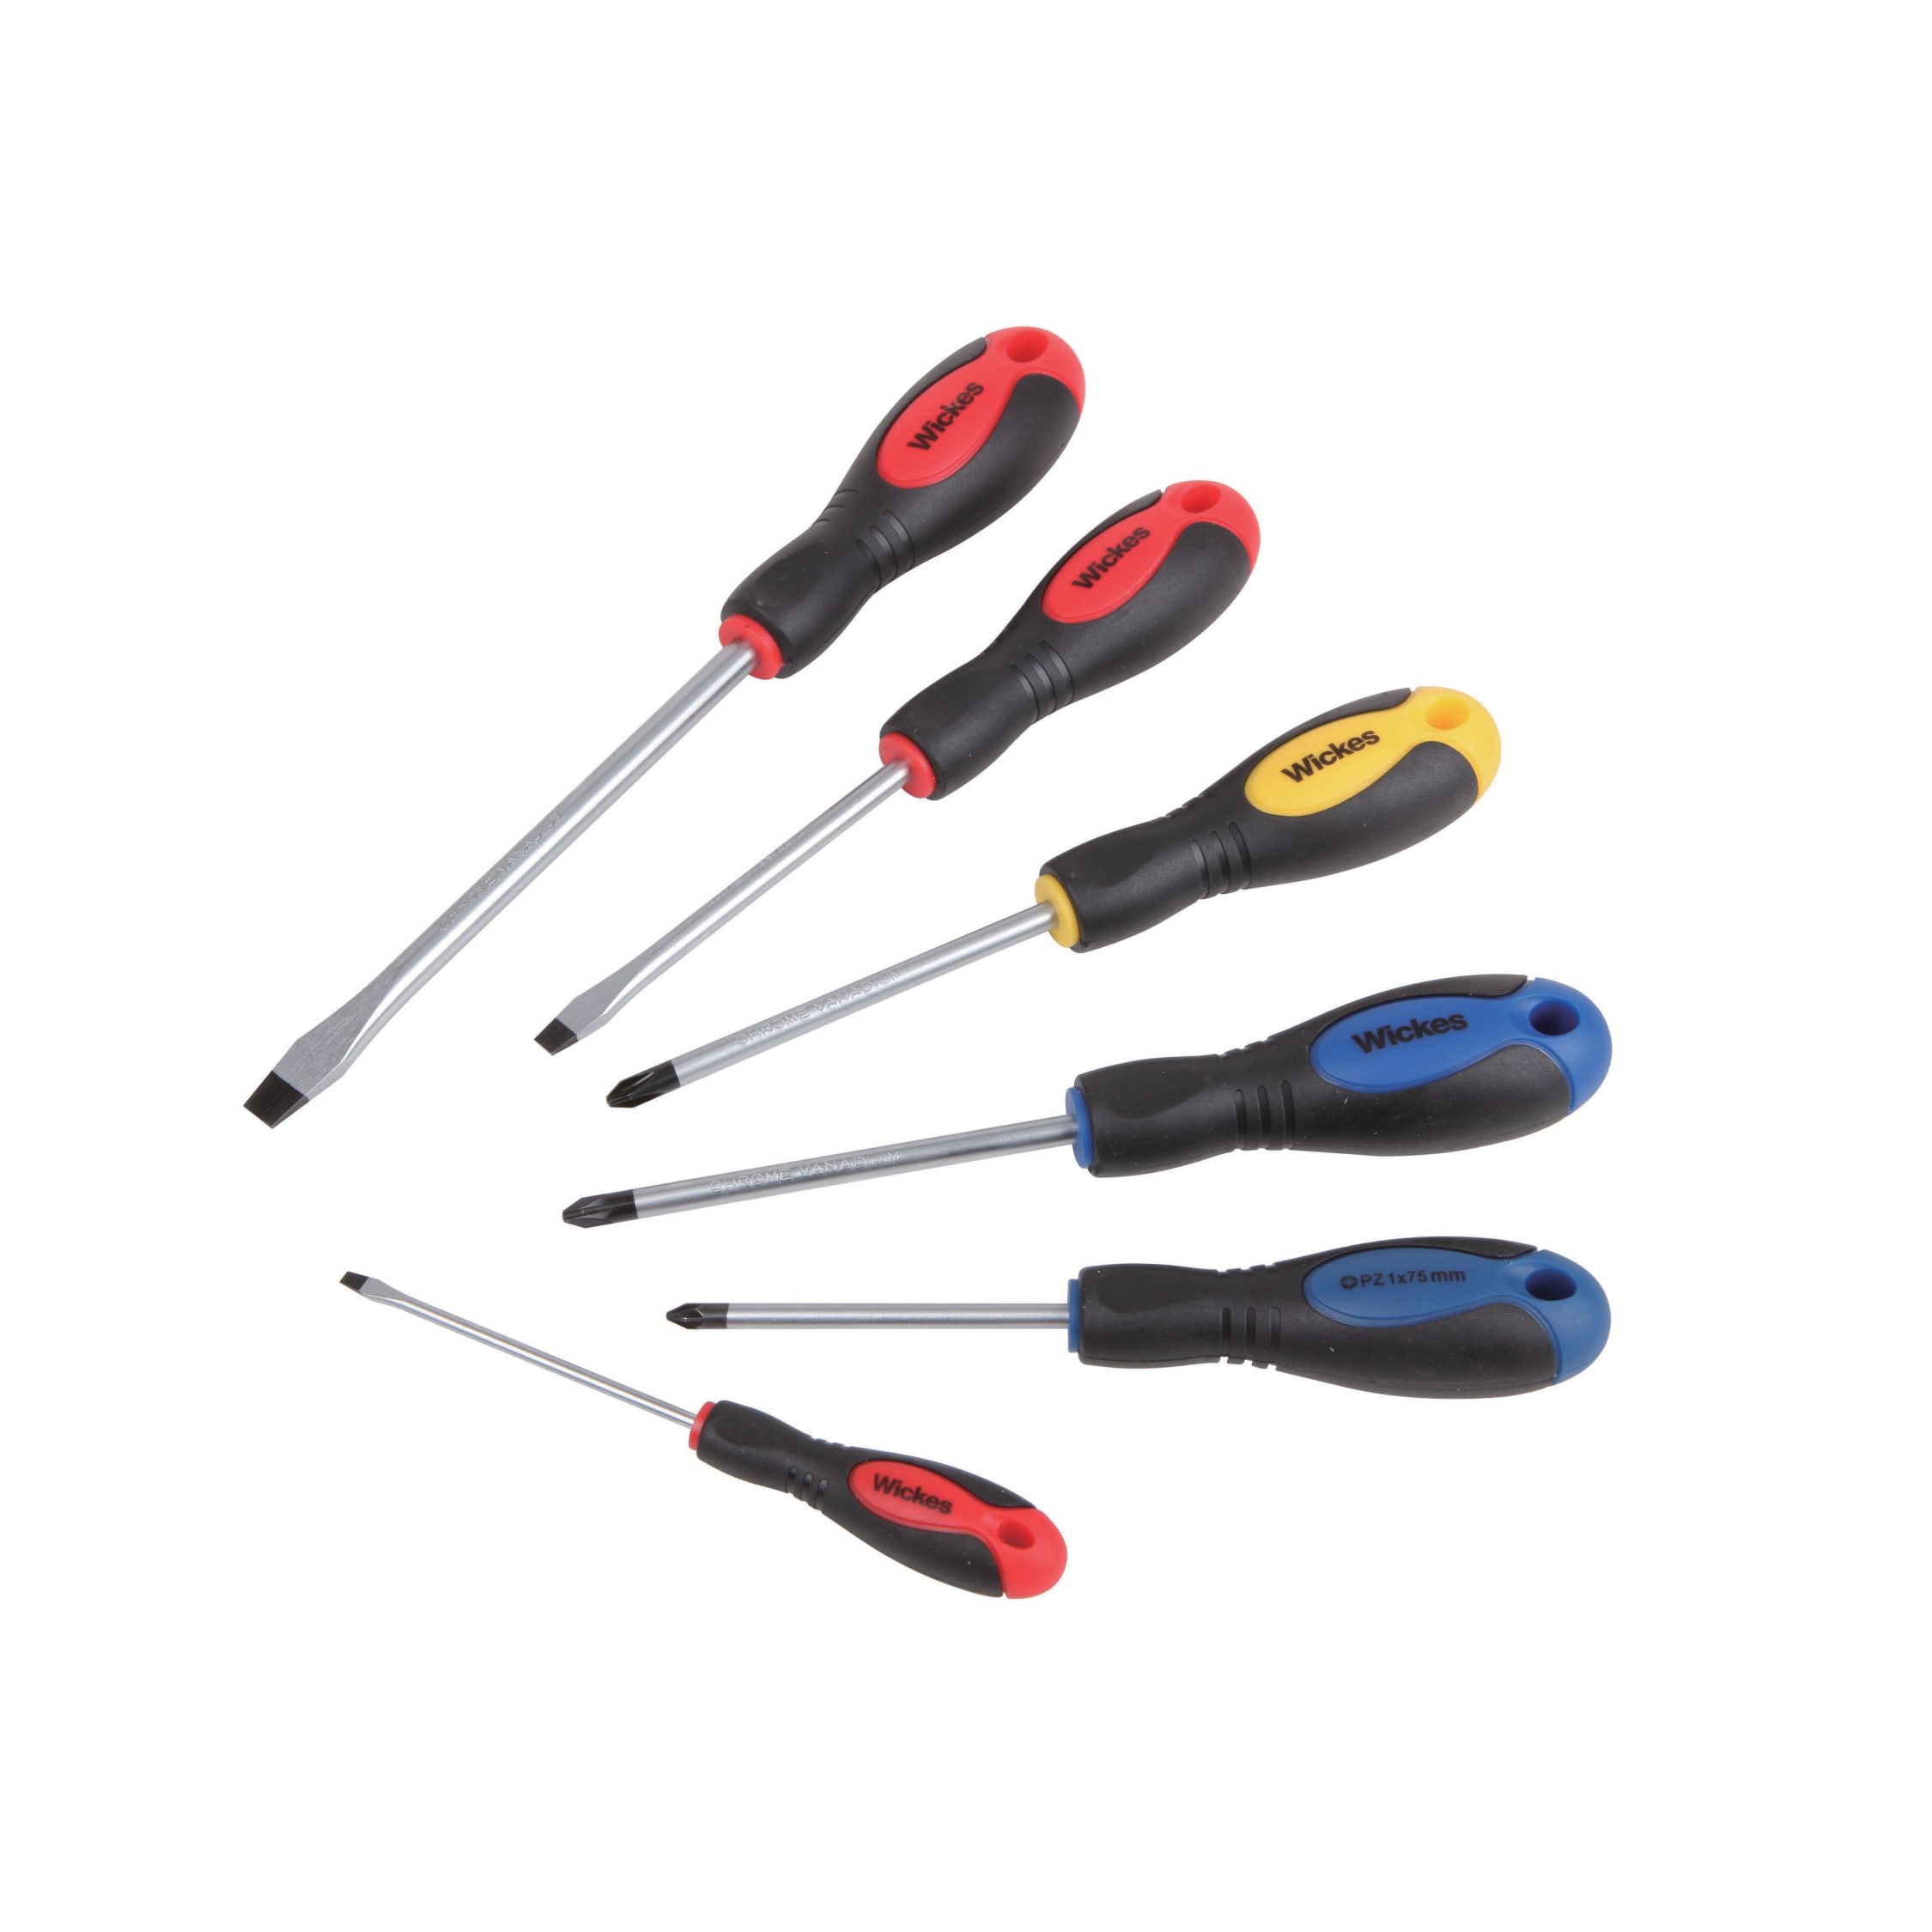 5 Pack Go Through Screwdriver Sets Magnetic Tips and Ergonomic Handles Cheap!